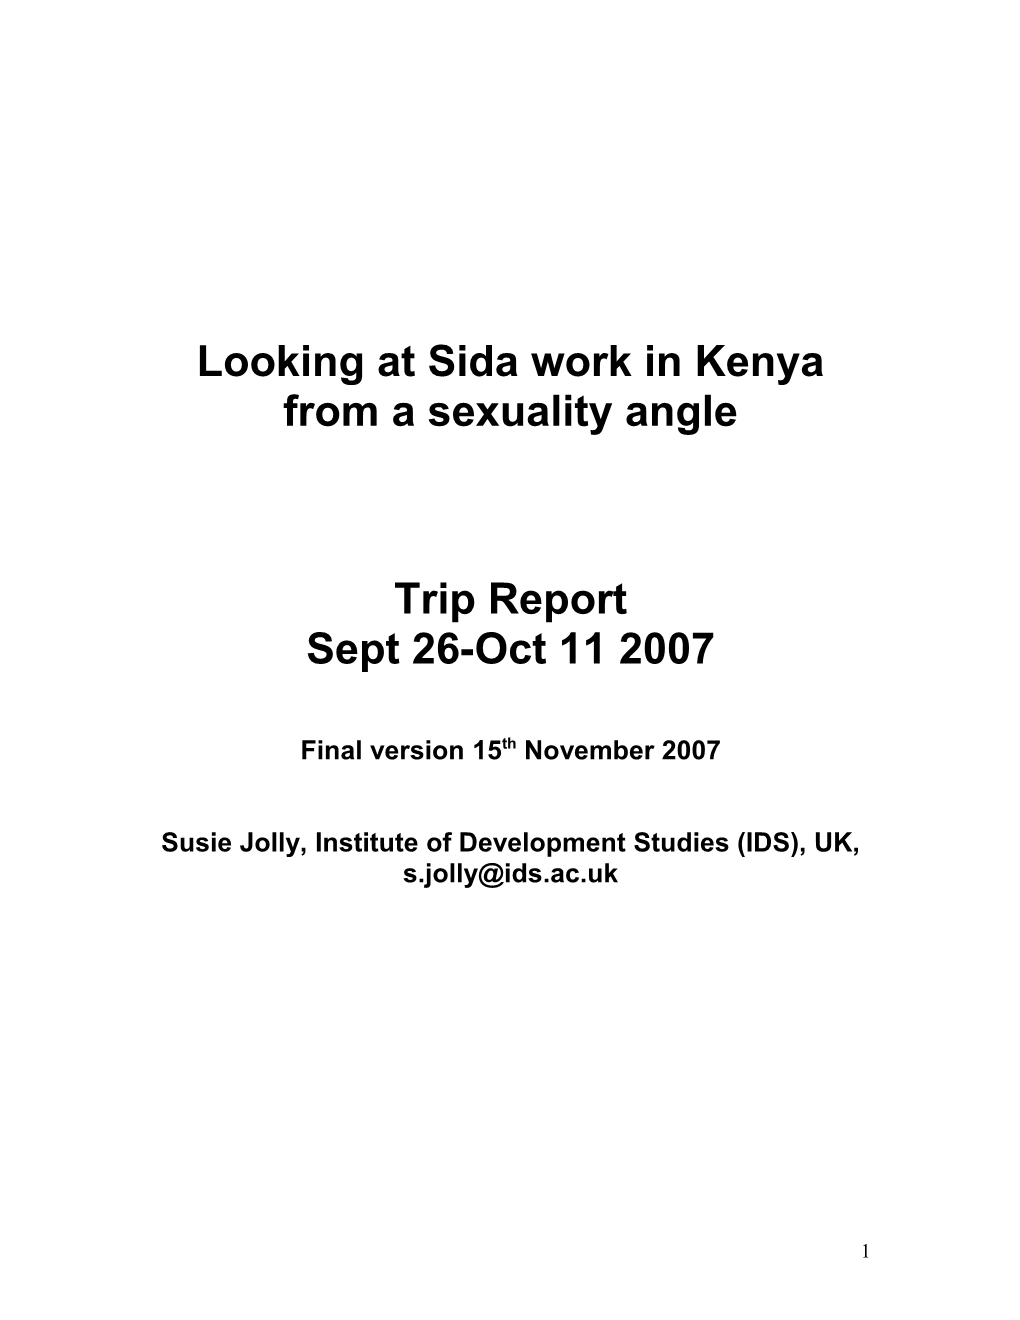 Looking at Sida Work in Kenya from a Sexuality Angle